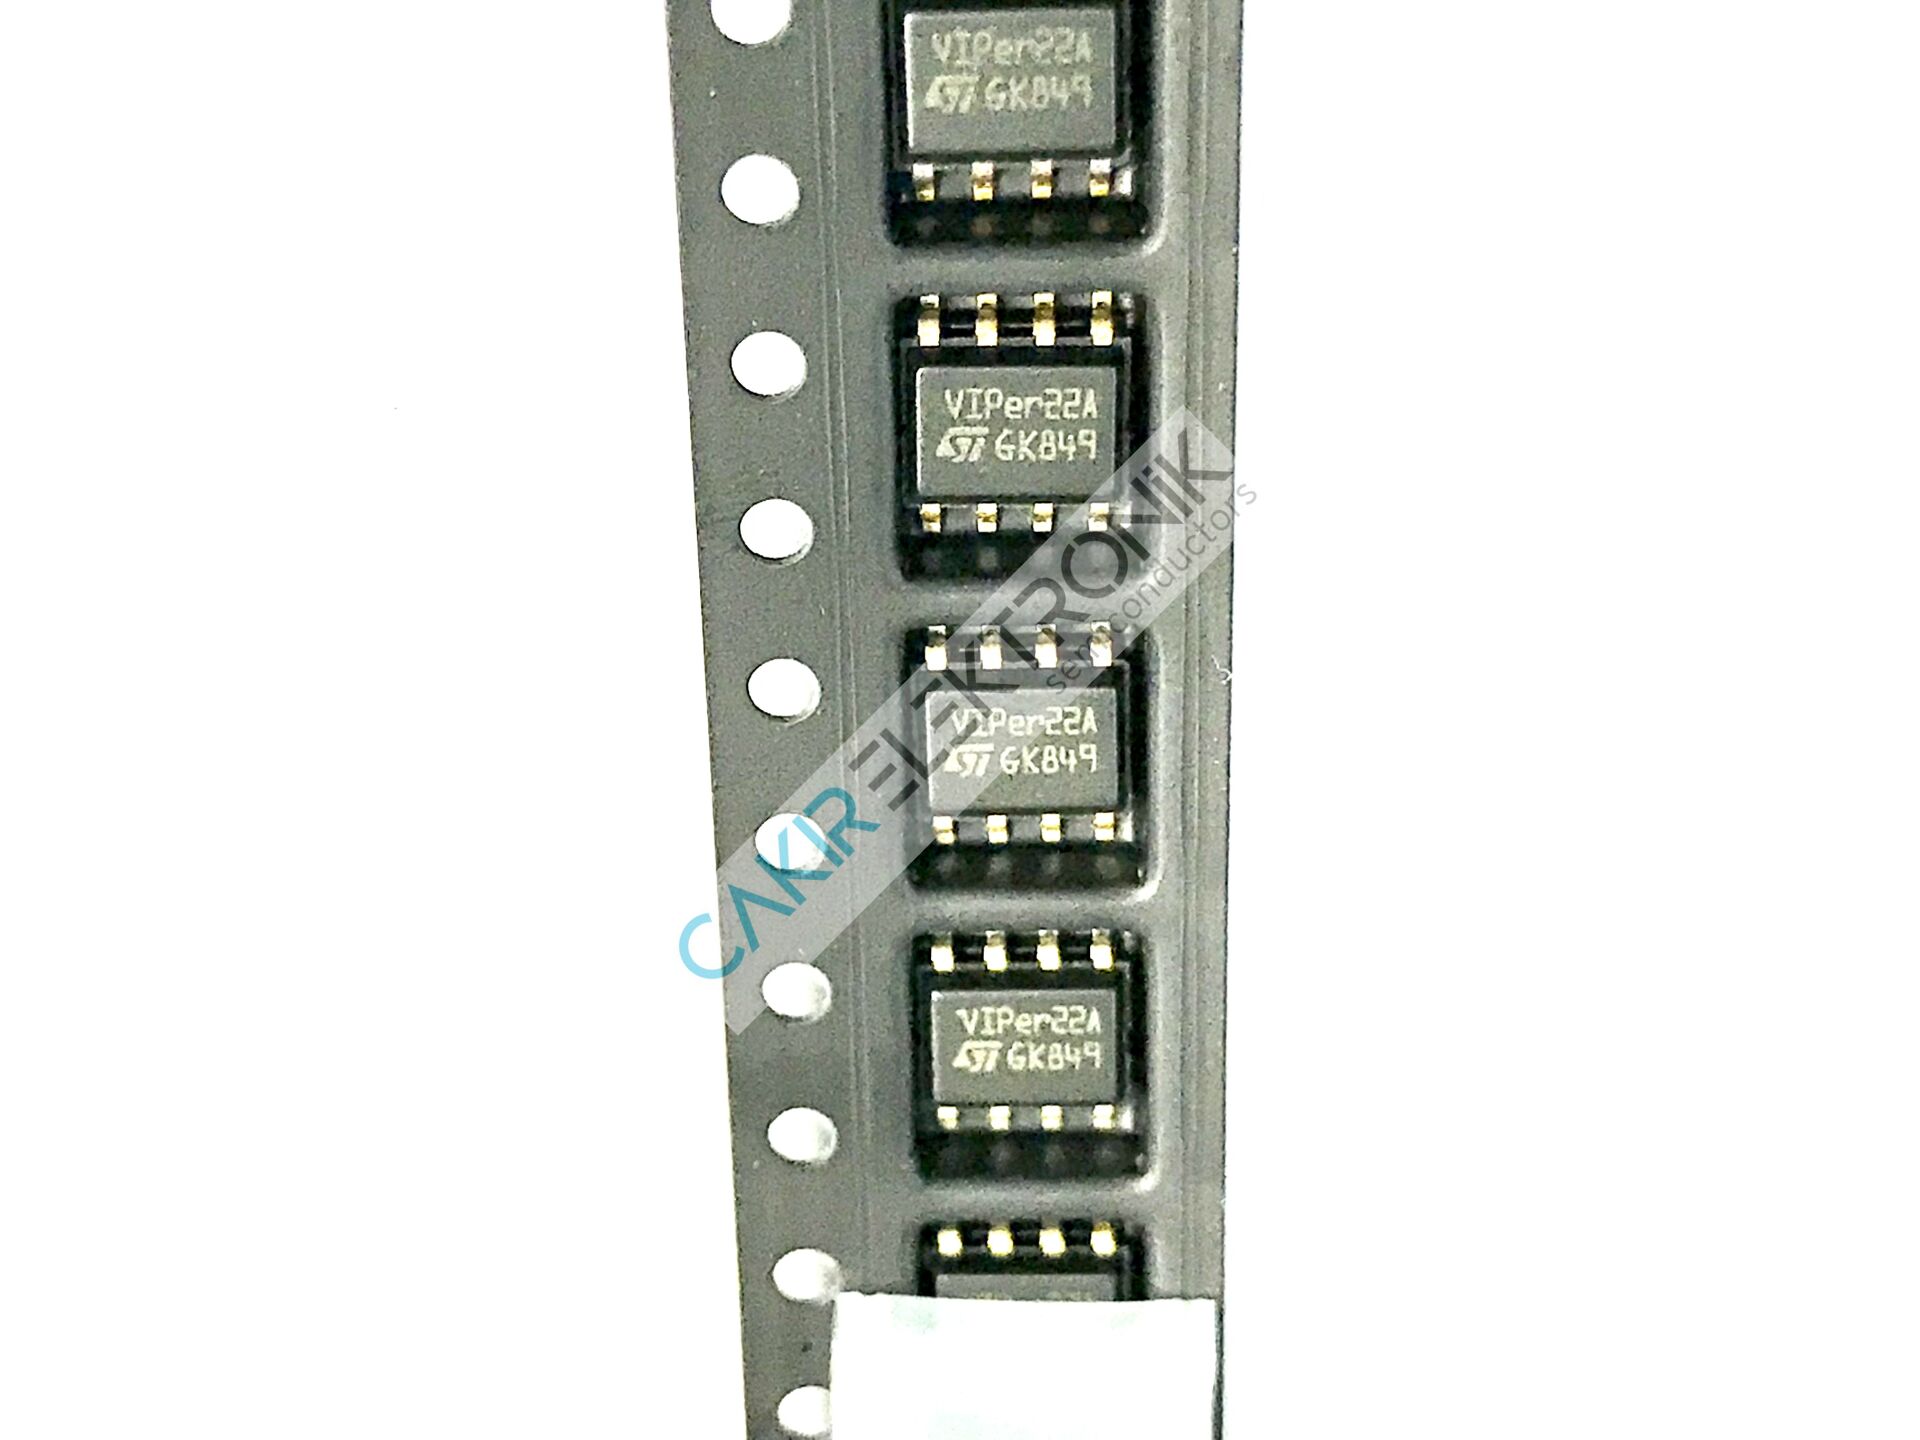 VIPER22A - VIPER22 - VIPER22ASTR Low power offline switched-mode power supply primary switcher - SOIC8